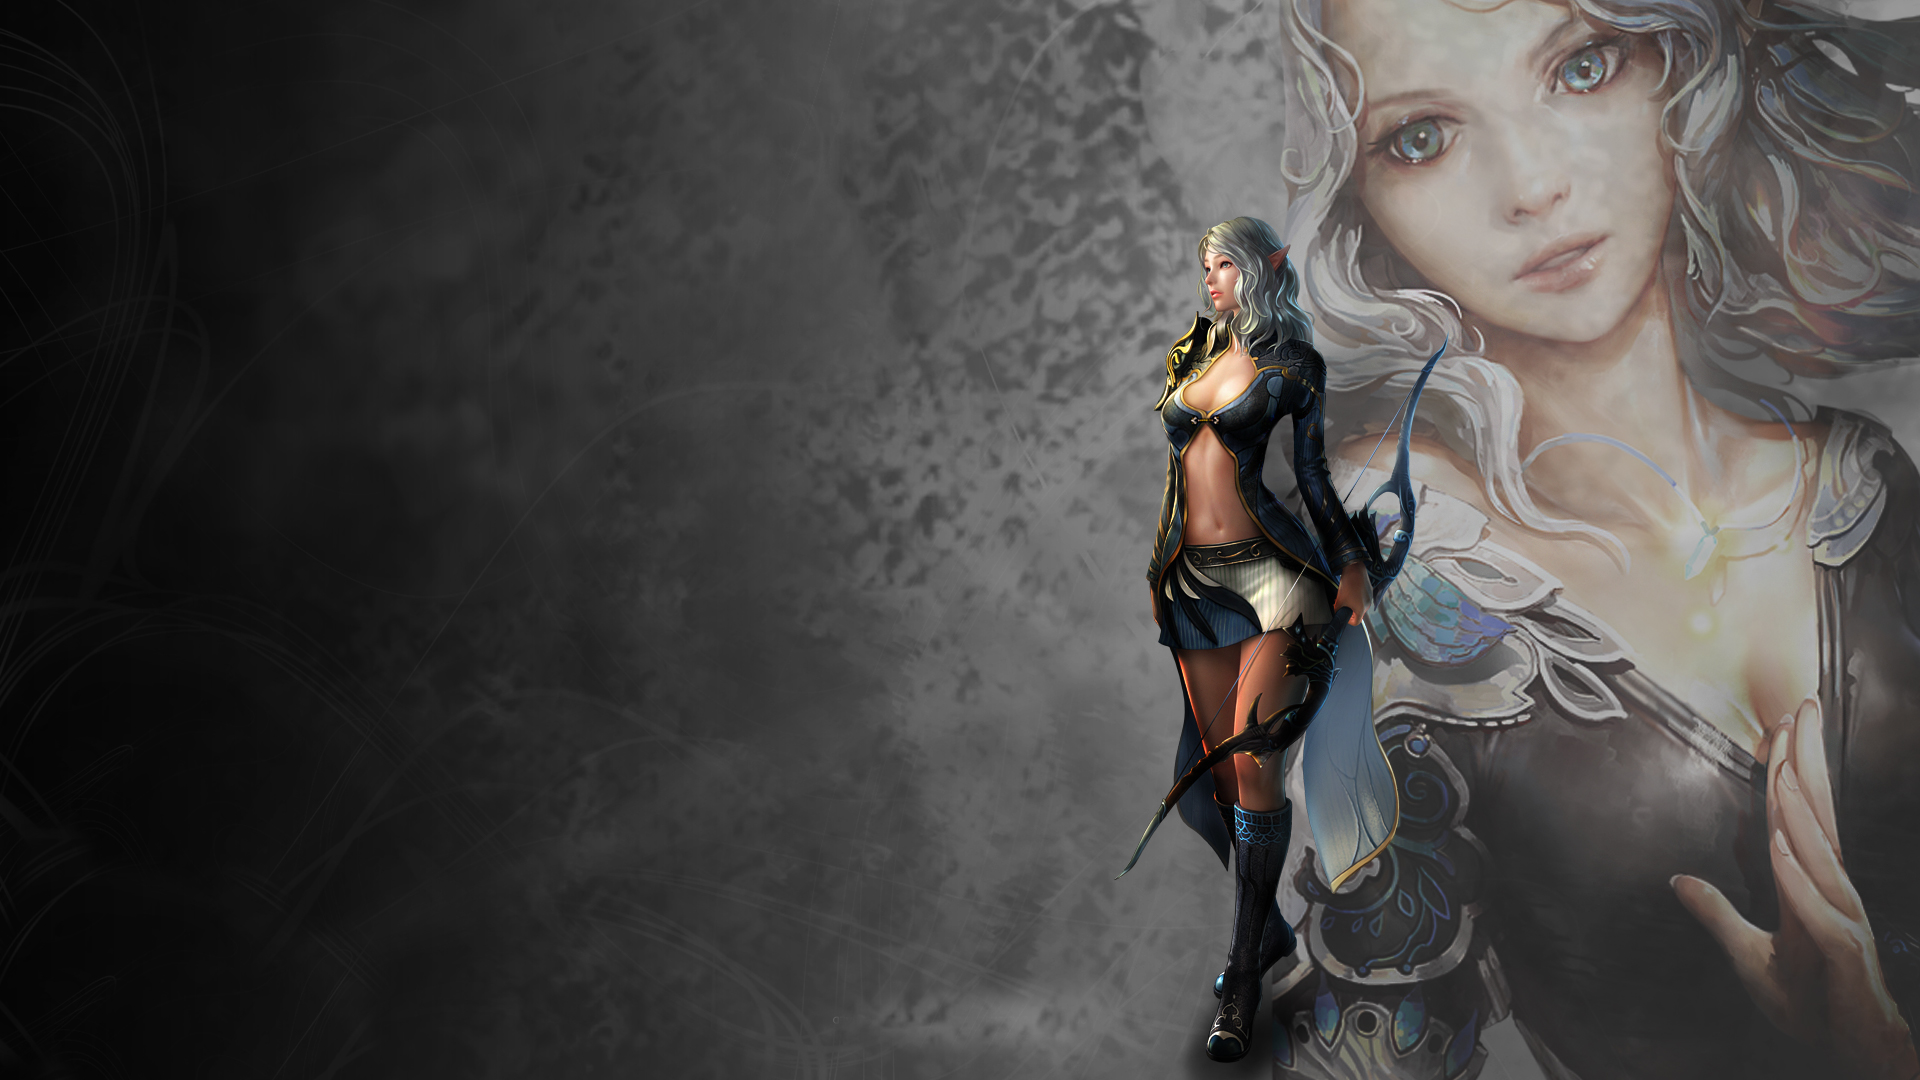 General 1920x1080 Archeage video games fantasy girl archer women belly boobs pointy ears standing bow miniskirt fantasy art